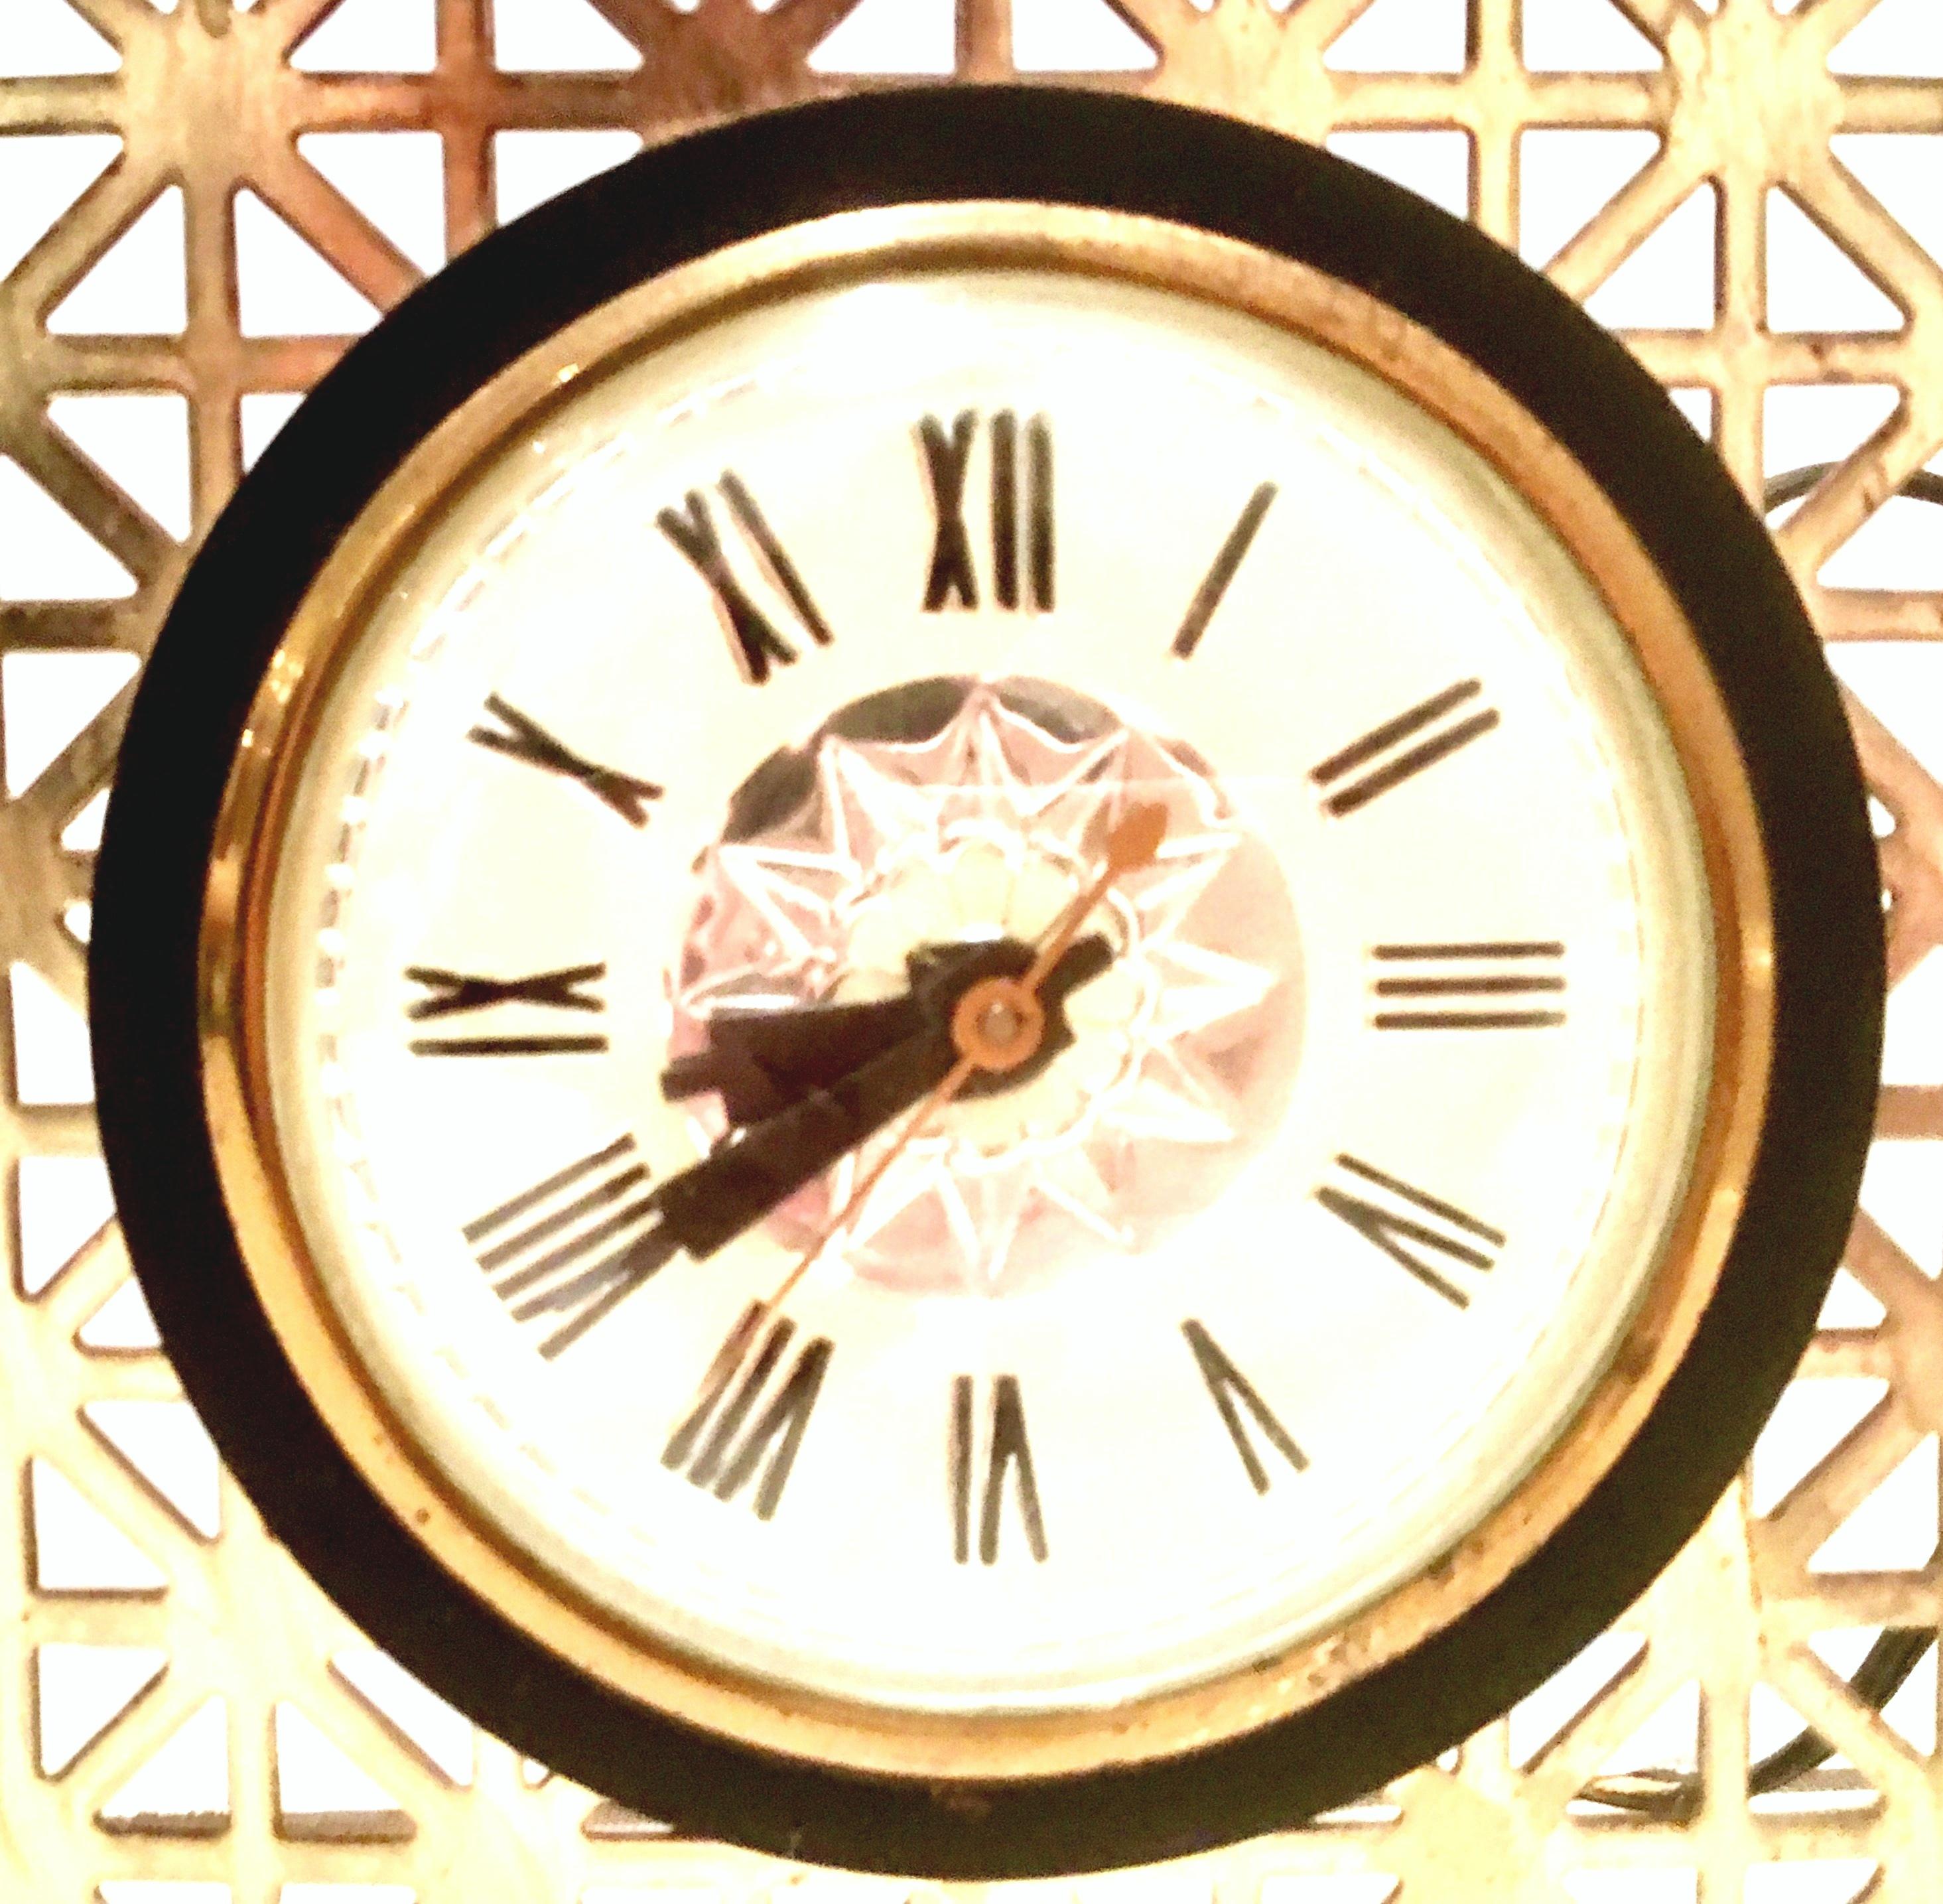 Mid-20th Century American Art Deco Gilt Brass Electrical Clock by, Bilt Rite For Sale 6